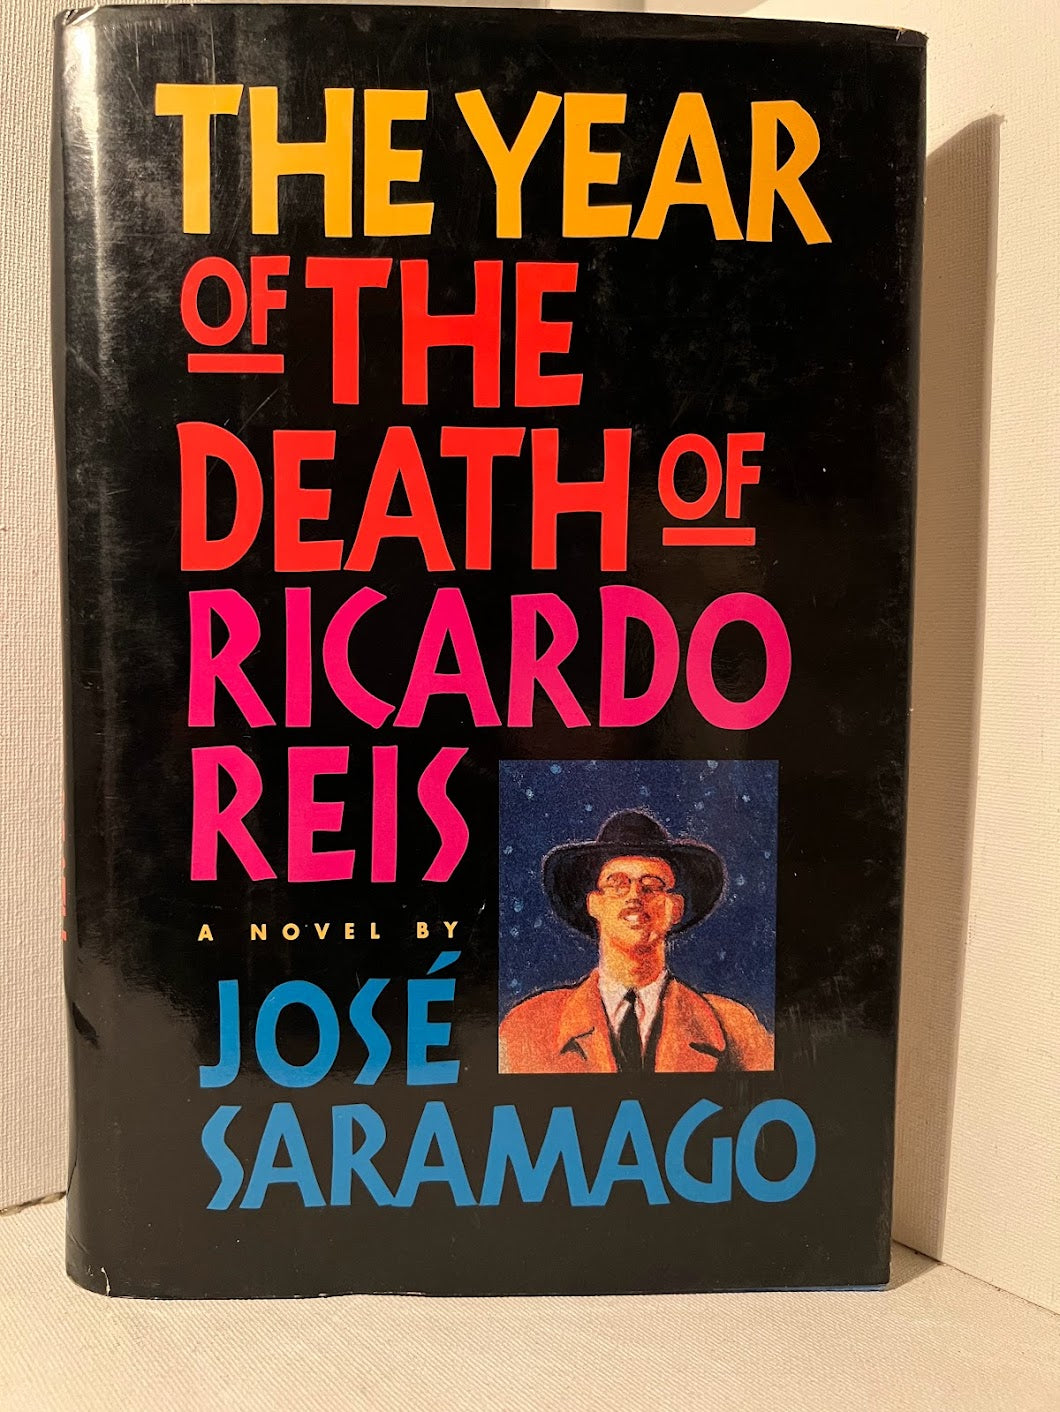 The Year of the Death of Ricardo Reis by Jose Saramago